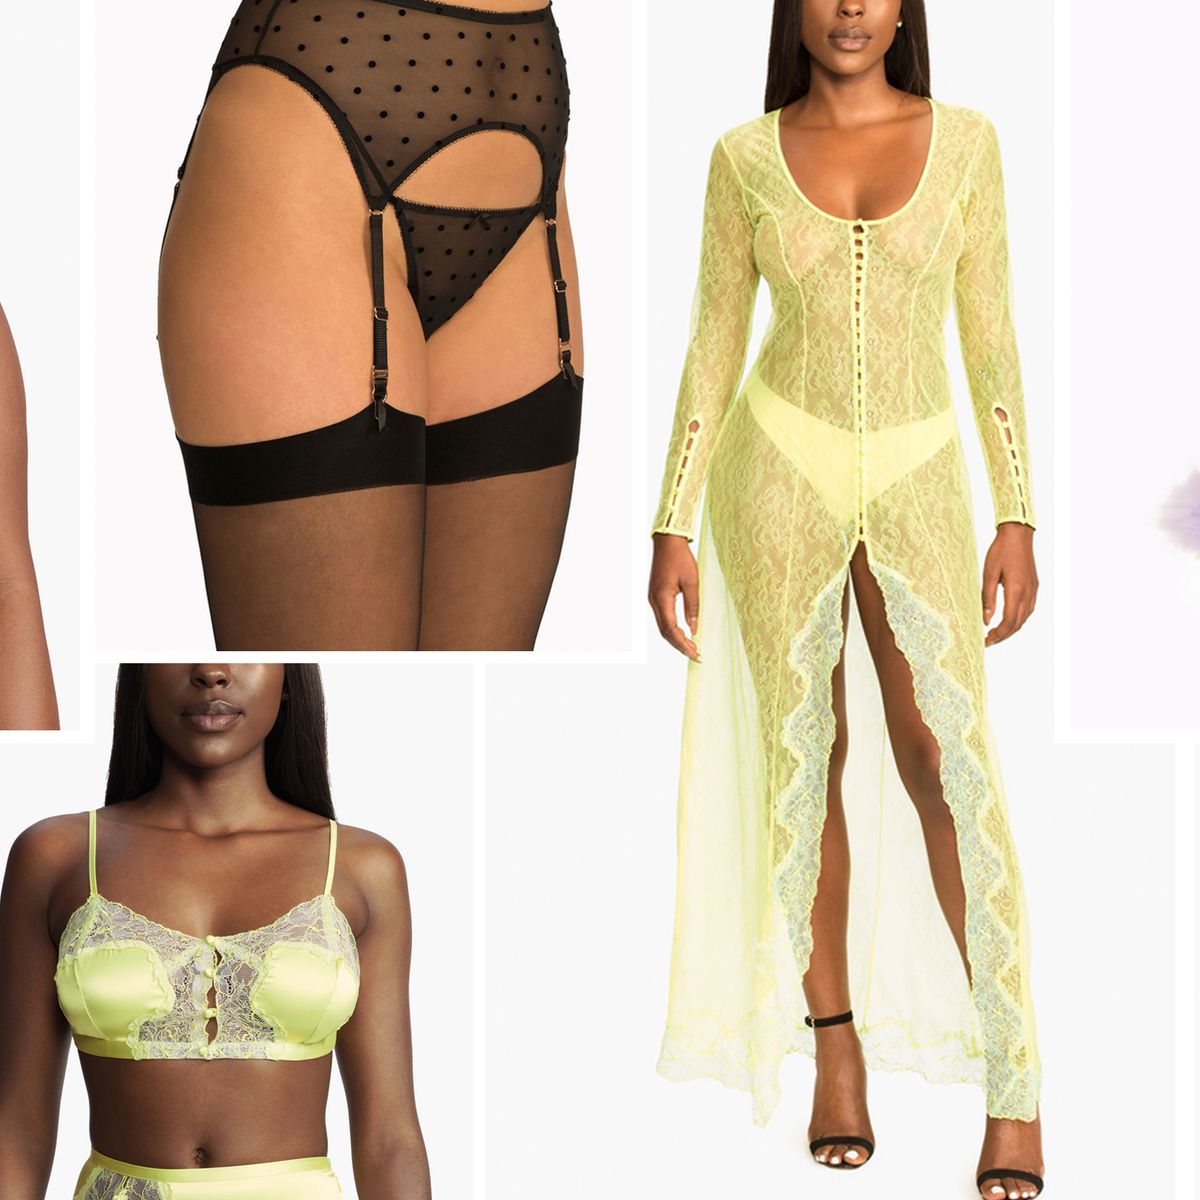 The 5 Must-Have Pieces From Rihanna's Savage x Fenty Lingerie Collection